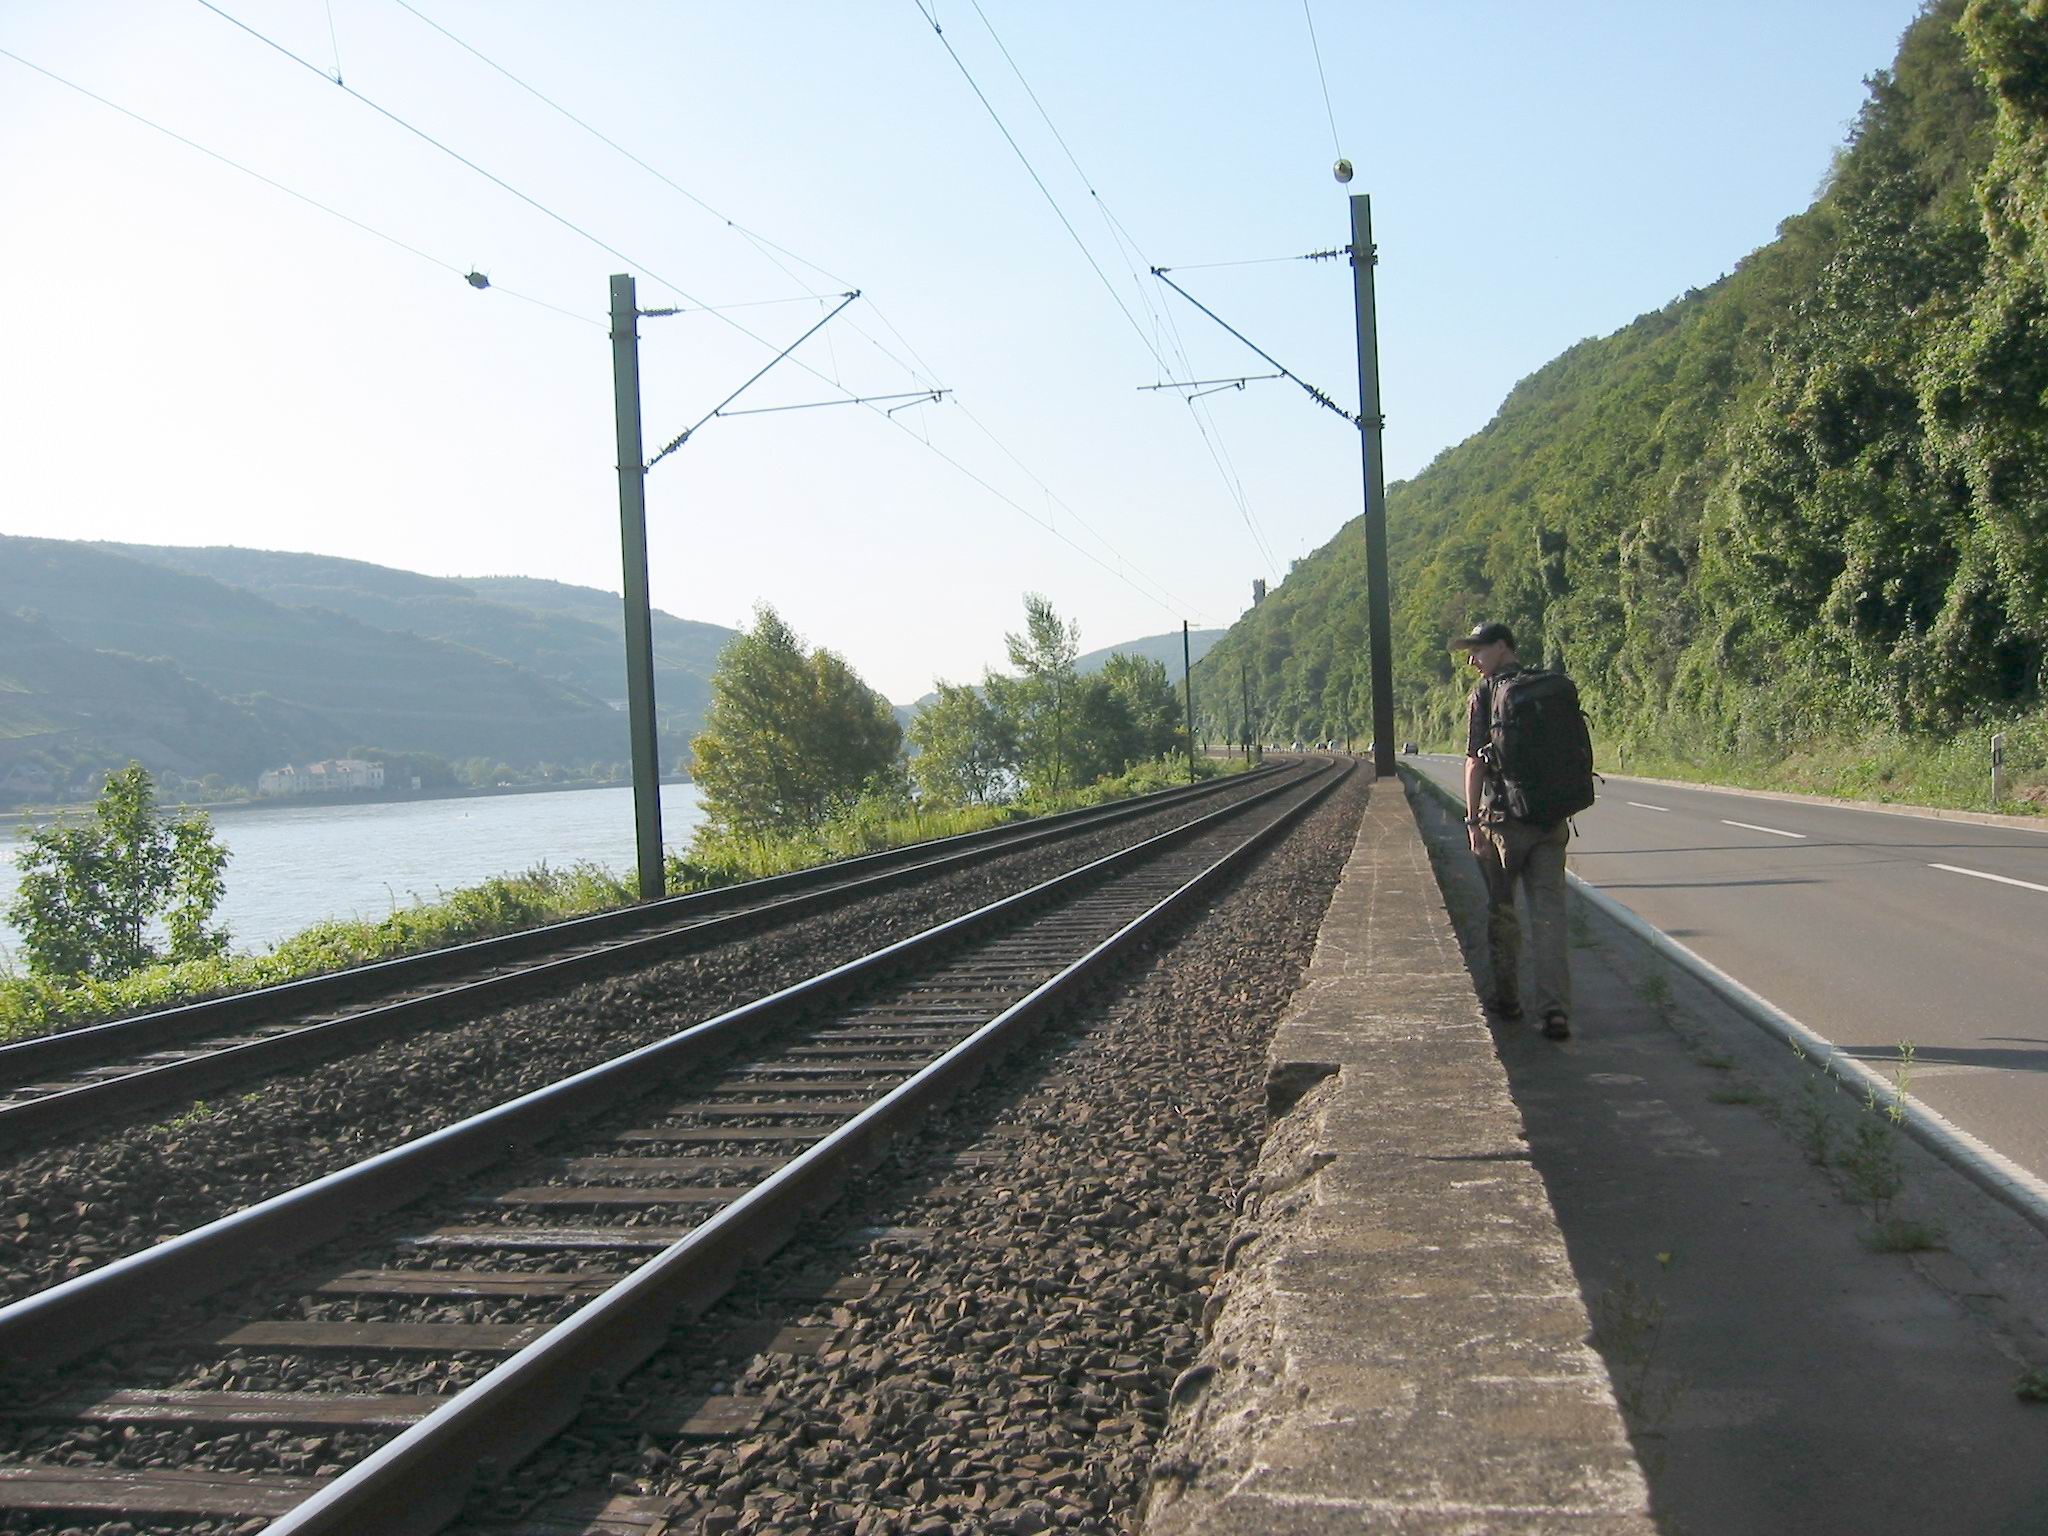 I hike a long distance from the train station to Burg Rheinstein